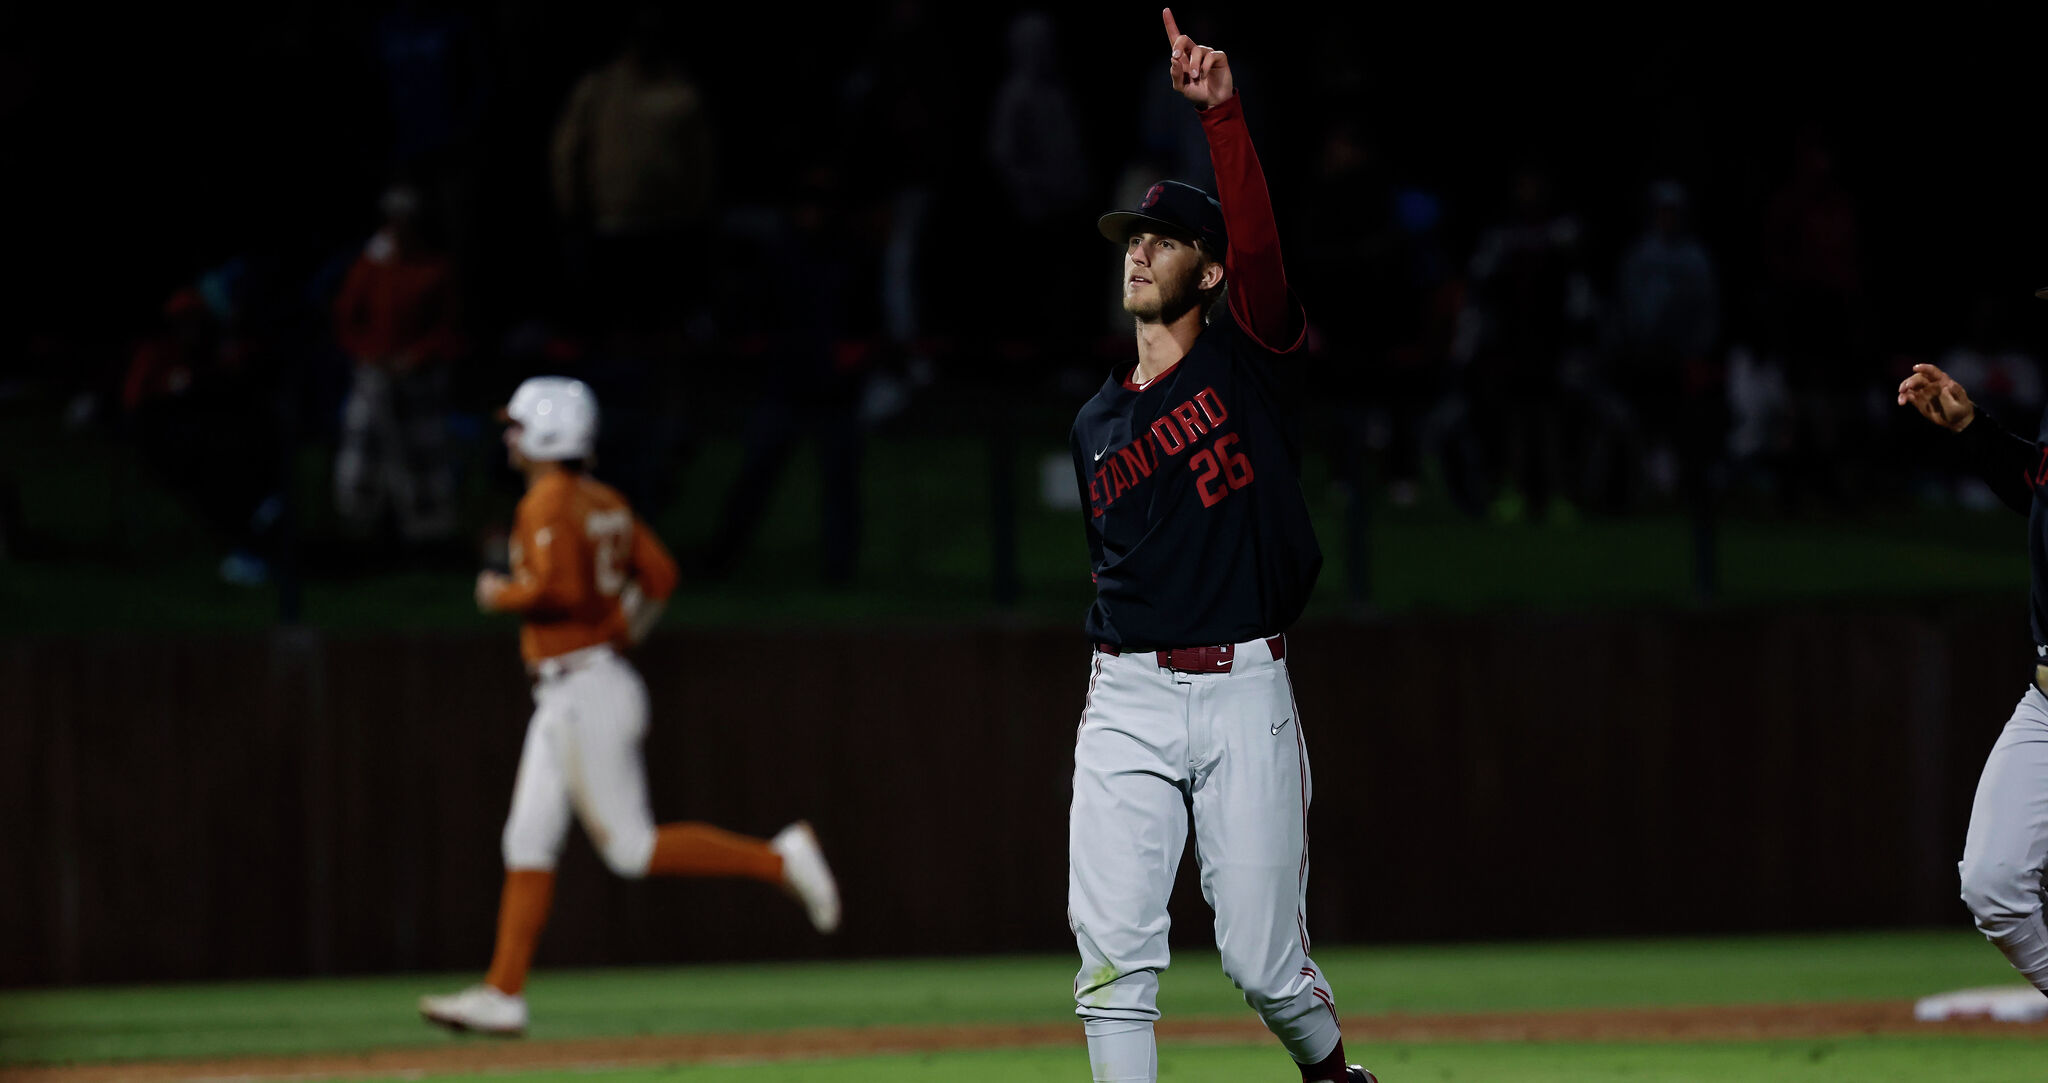 Texas baseball season ends with loss to Stanford in NCAA tournament